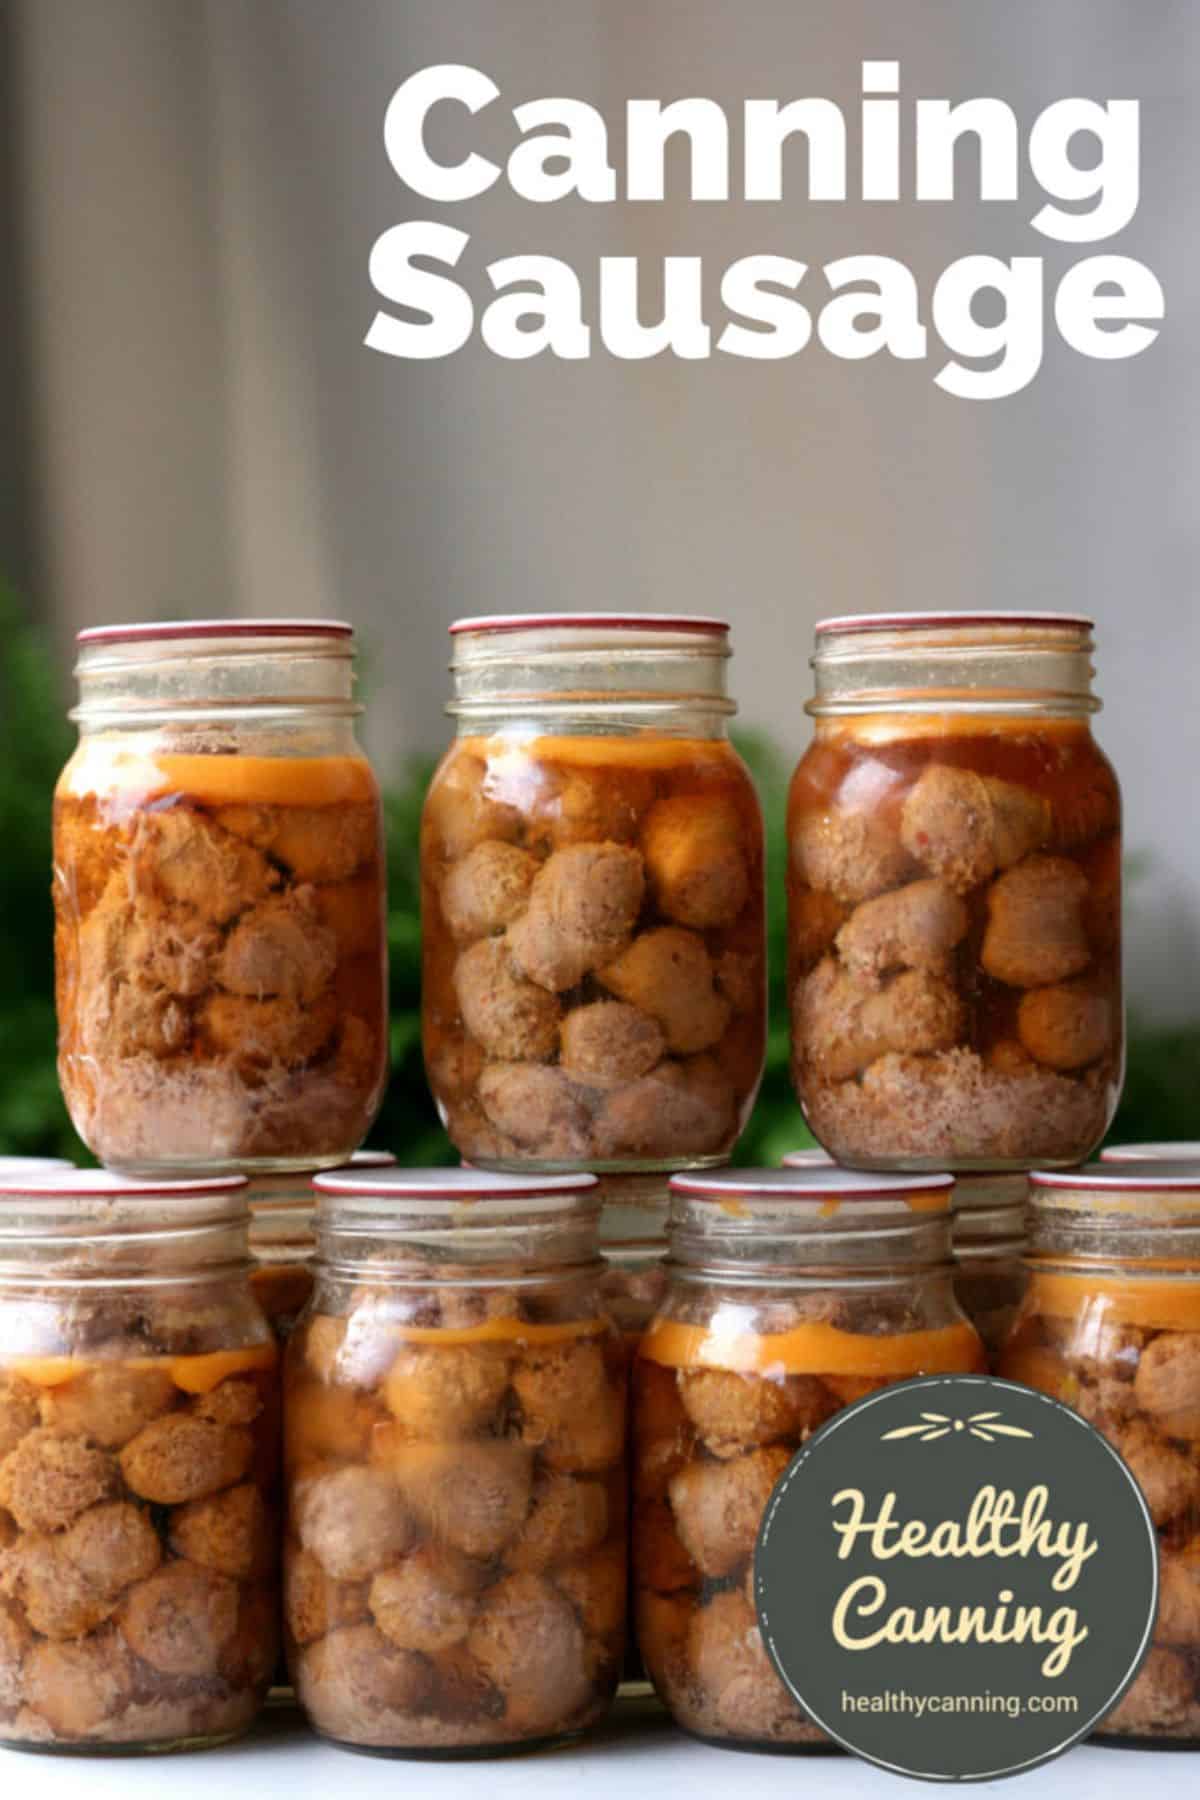 Canned sausage in glass jars.